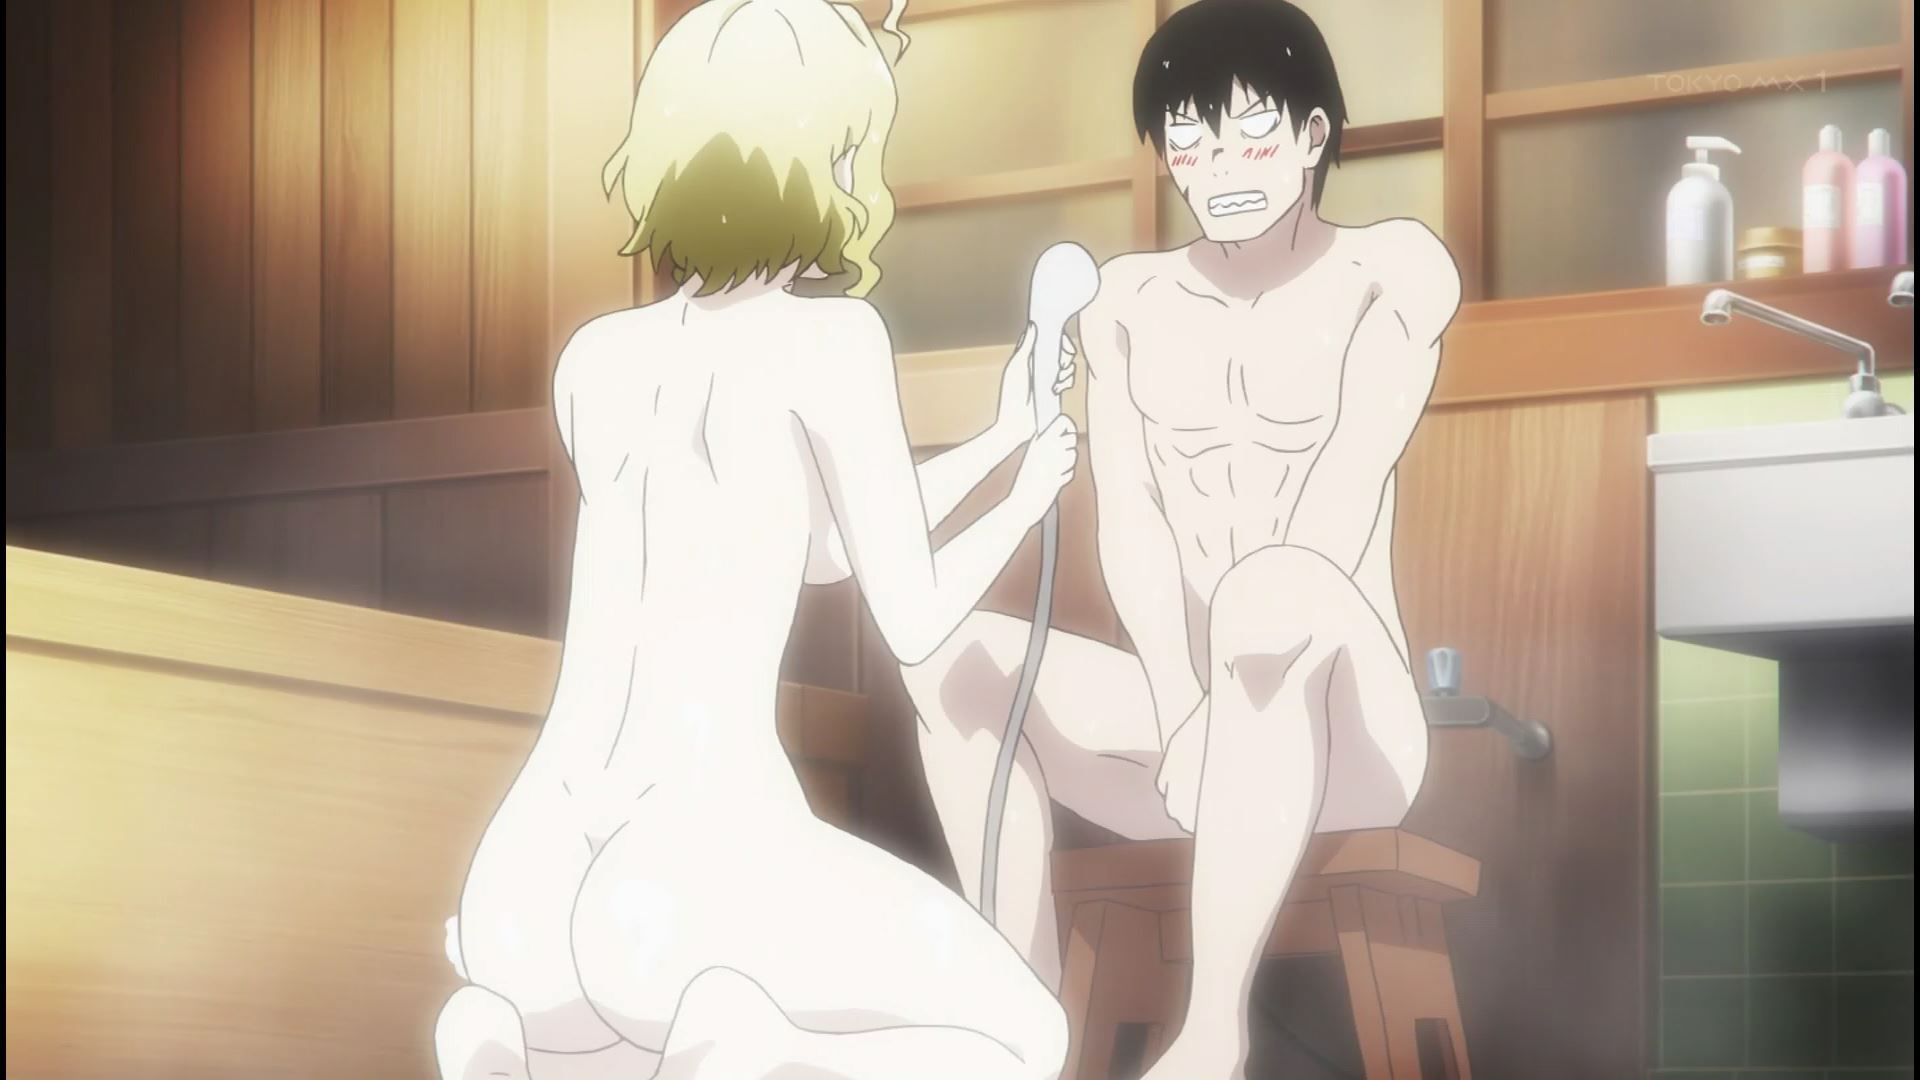 Anime [War x Love (Vallav)] In 11 episodes and become naked with girls and deep kiss or erotic scene! 2